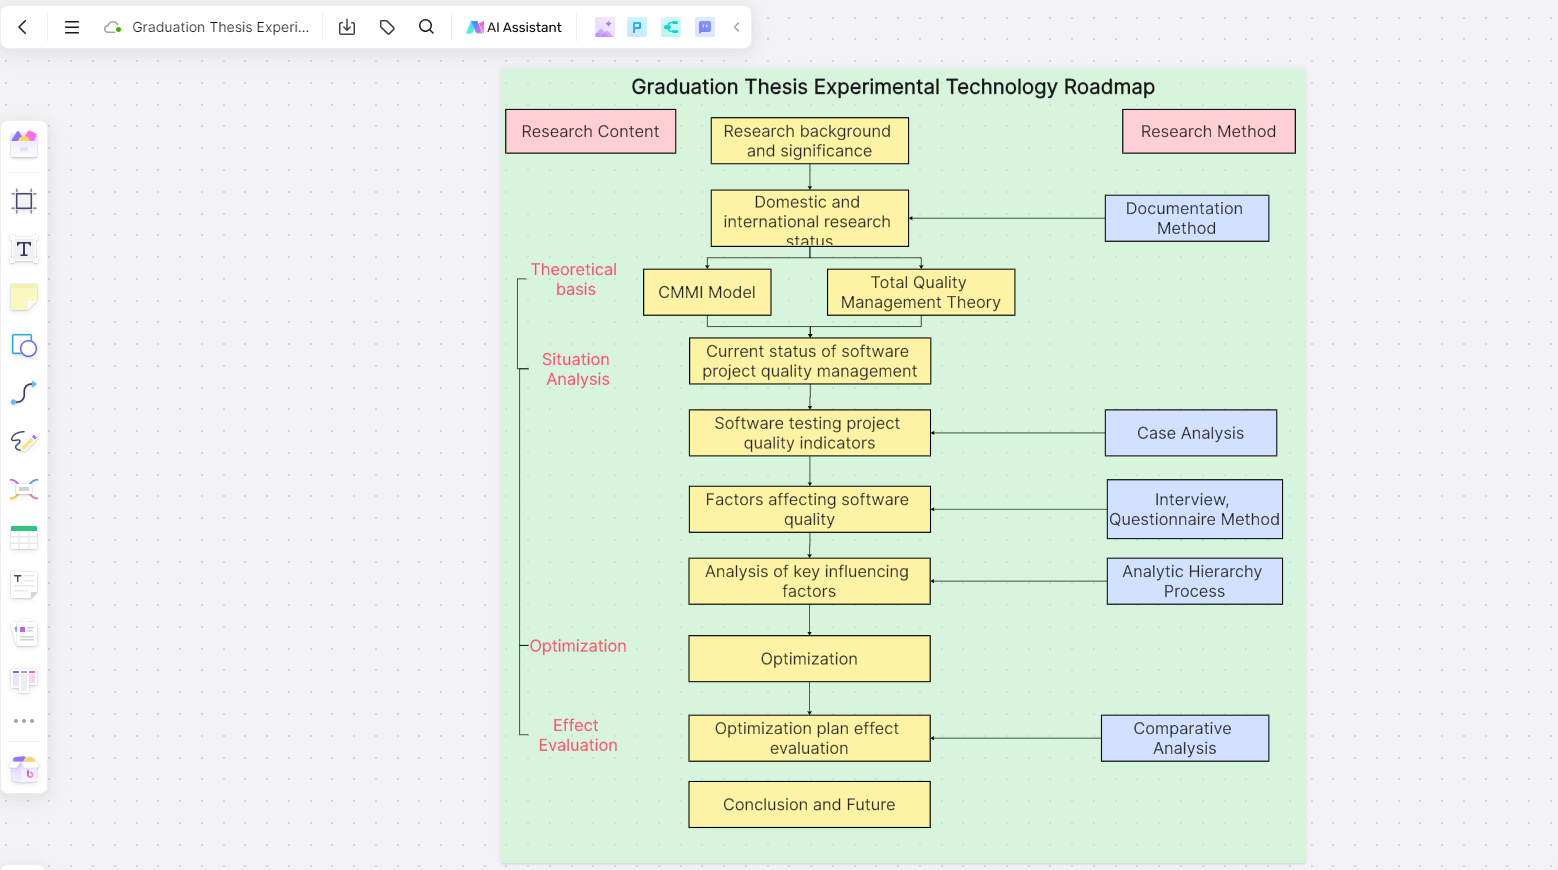 How to Draw Technology Roadmap?